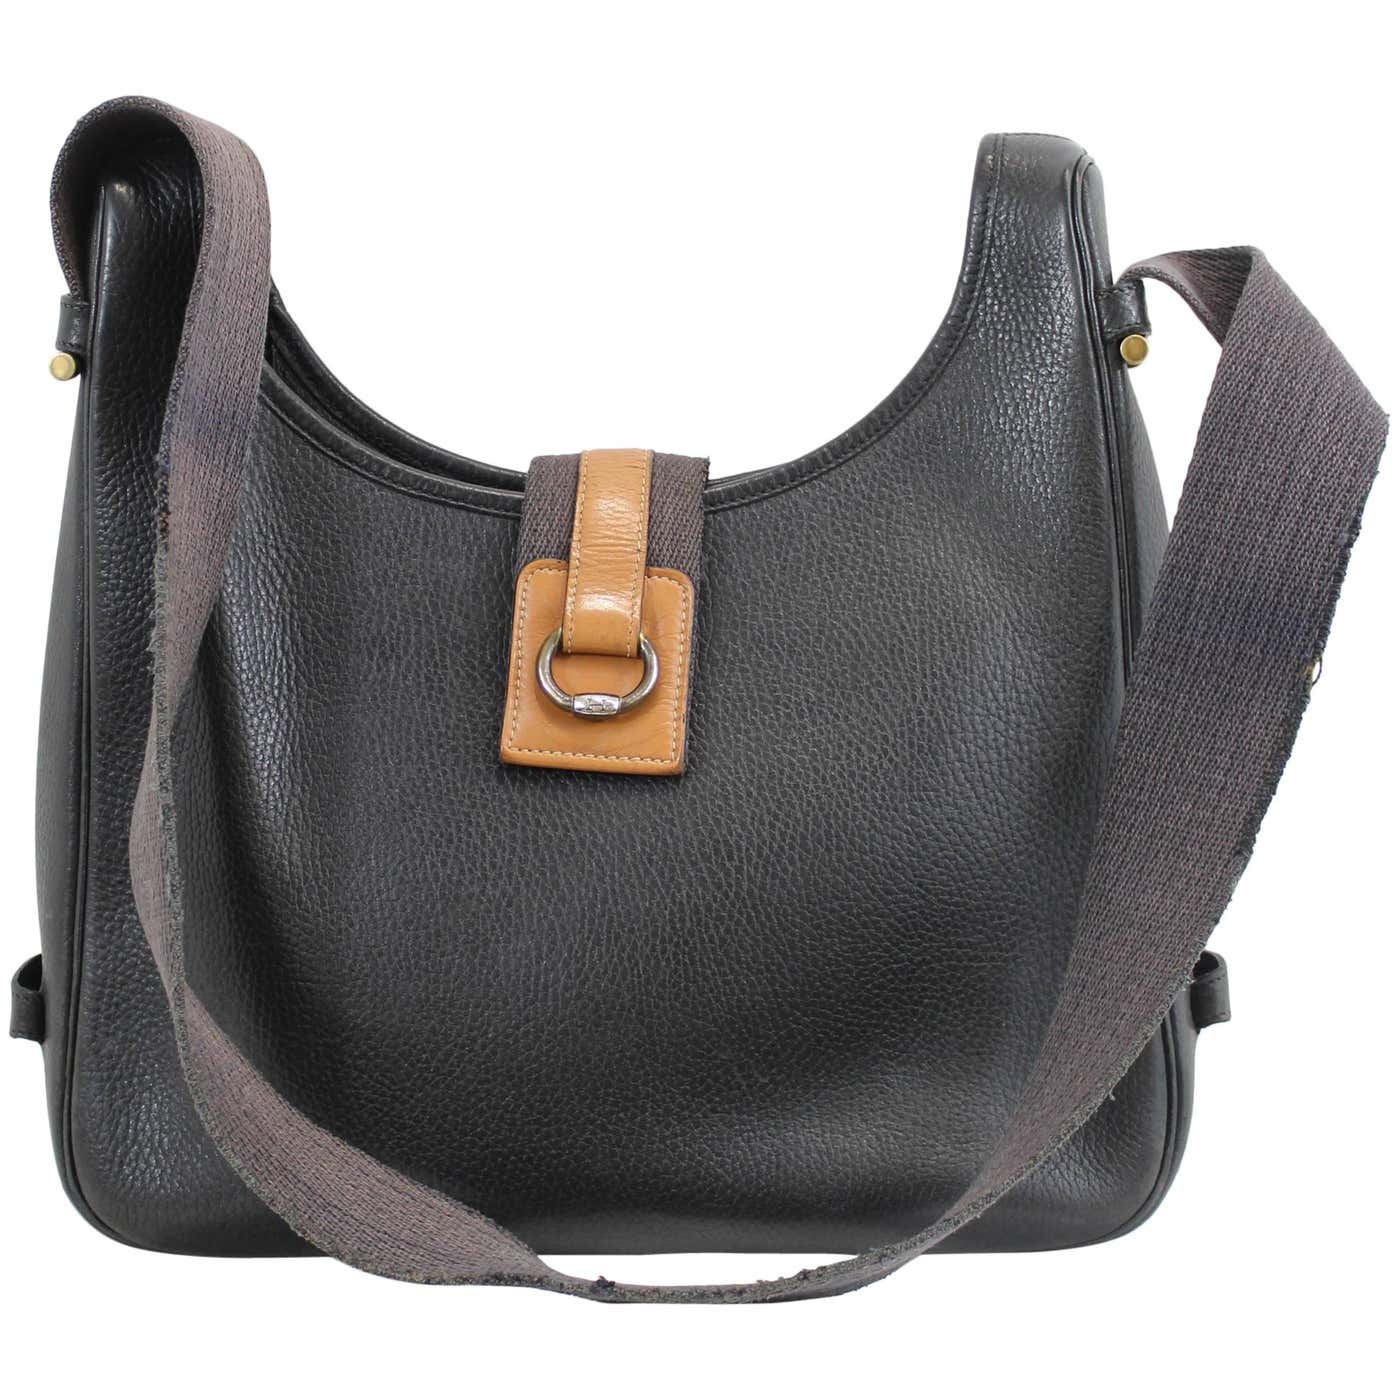 Vintage Tsako Hermes Bag in Grained Togo Leather. 1986 (marked P) at ...